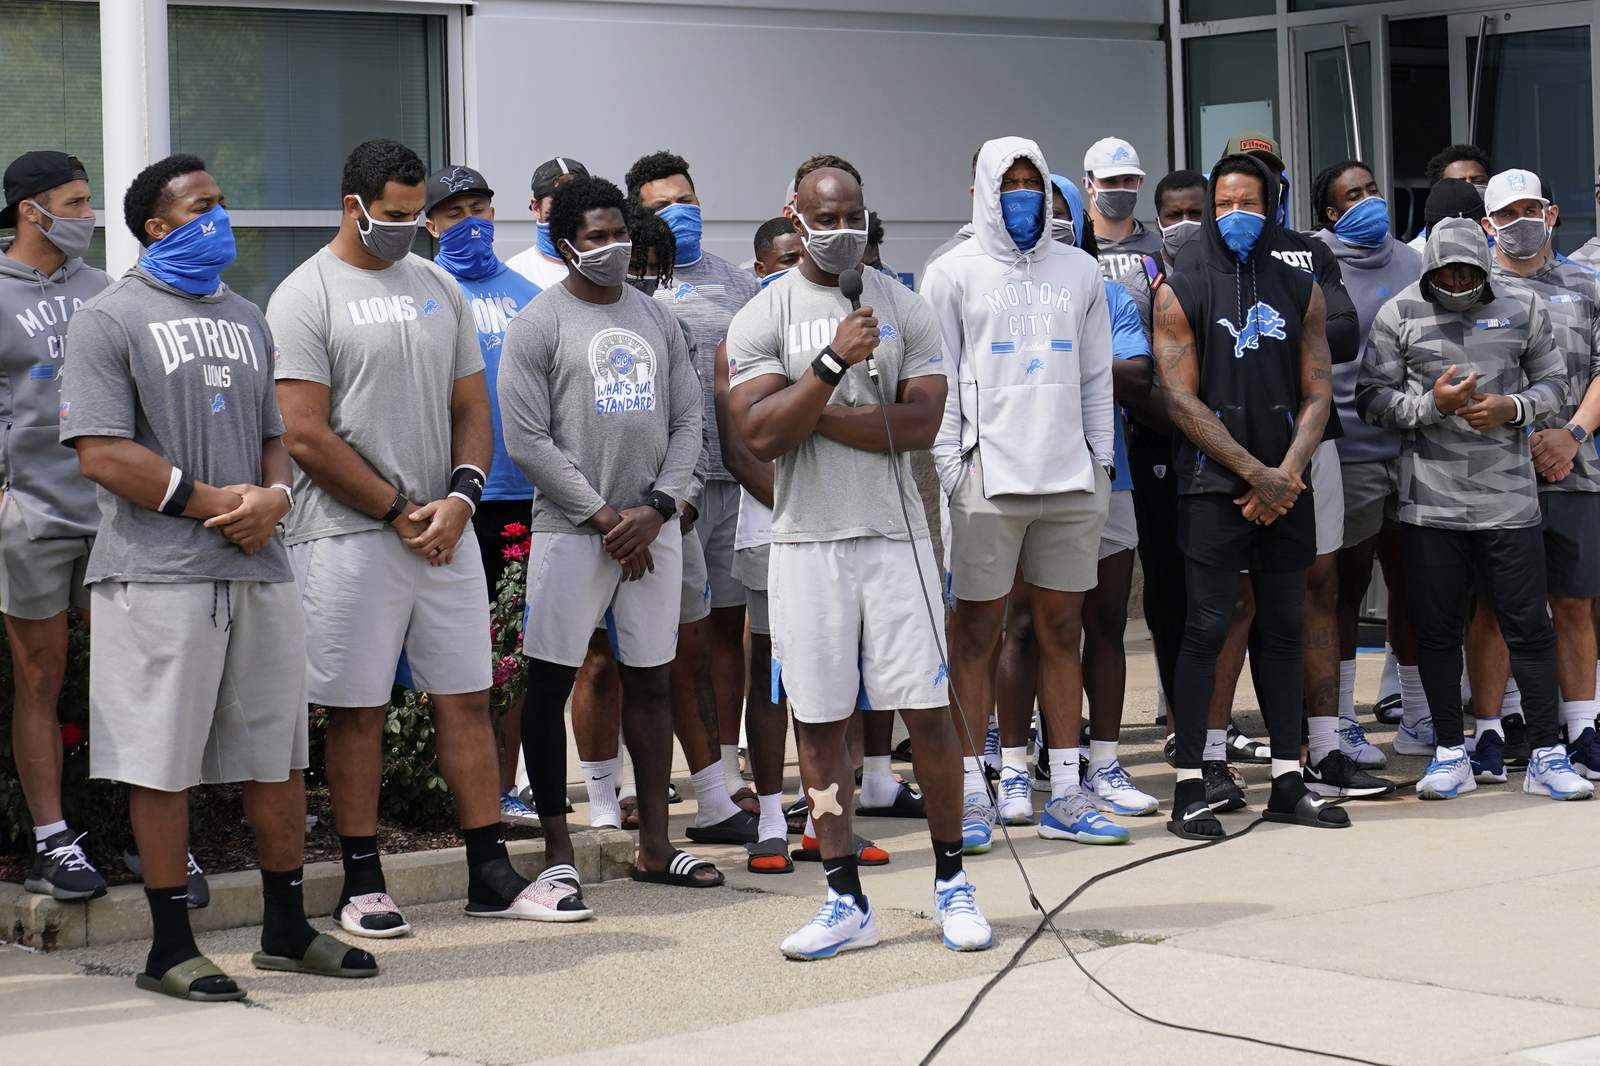 Lions skip practice after discussing shooting of Jacob Blake